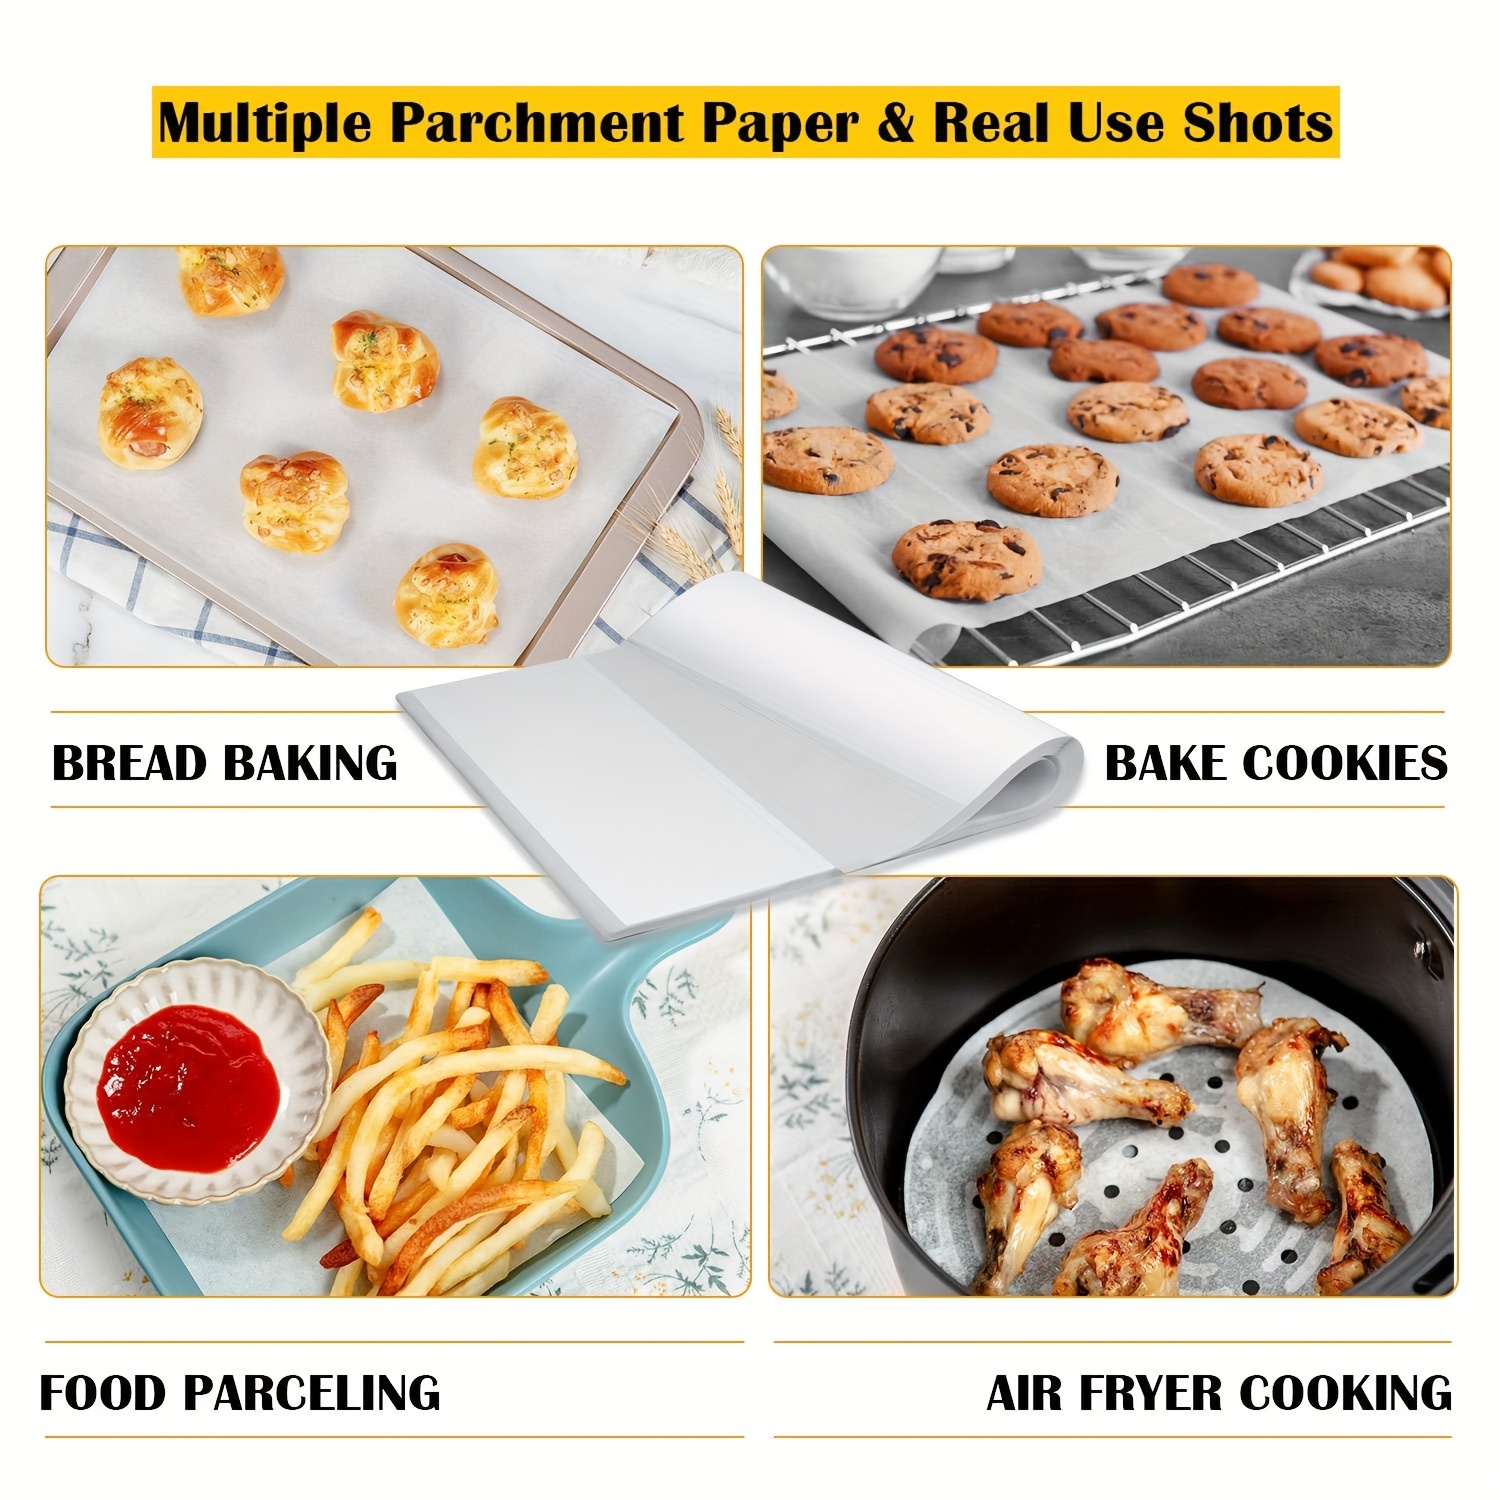 Is It Safe To Put Parchment Paper In An Air Fryer?